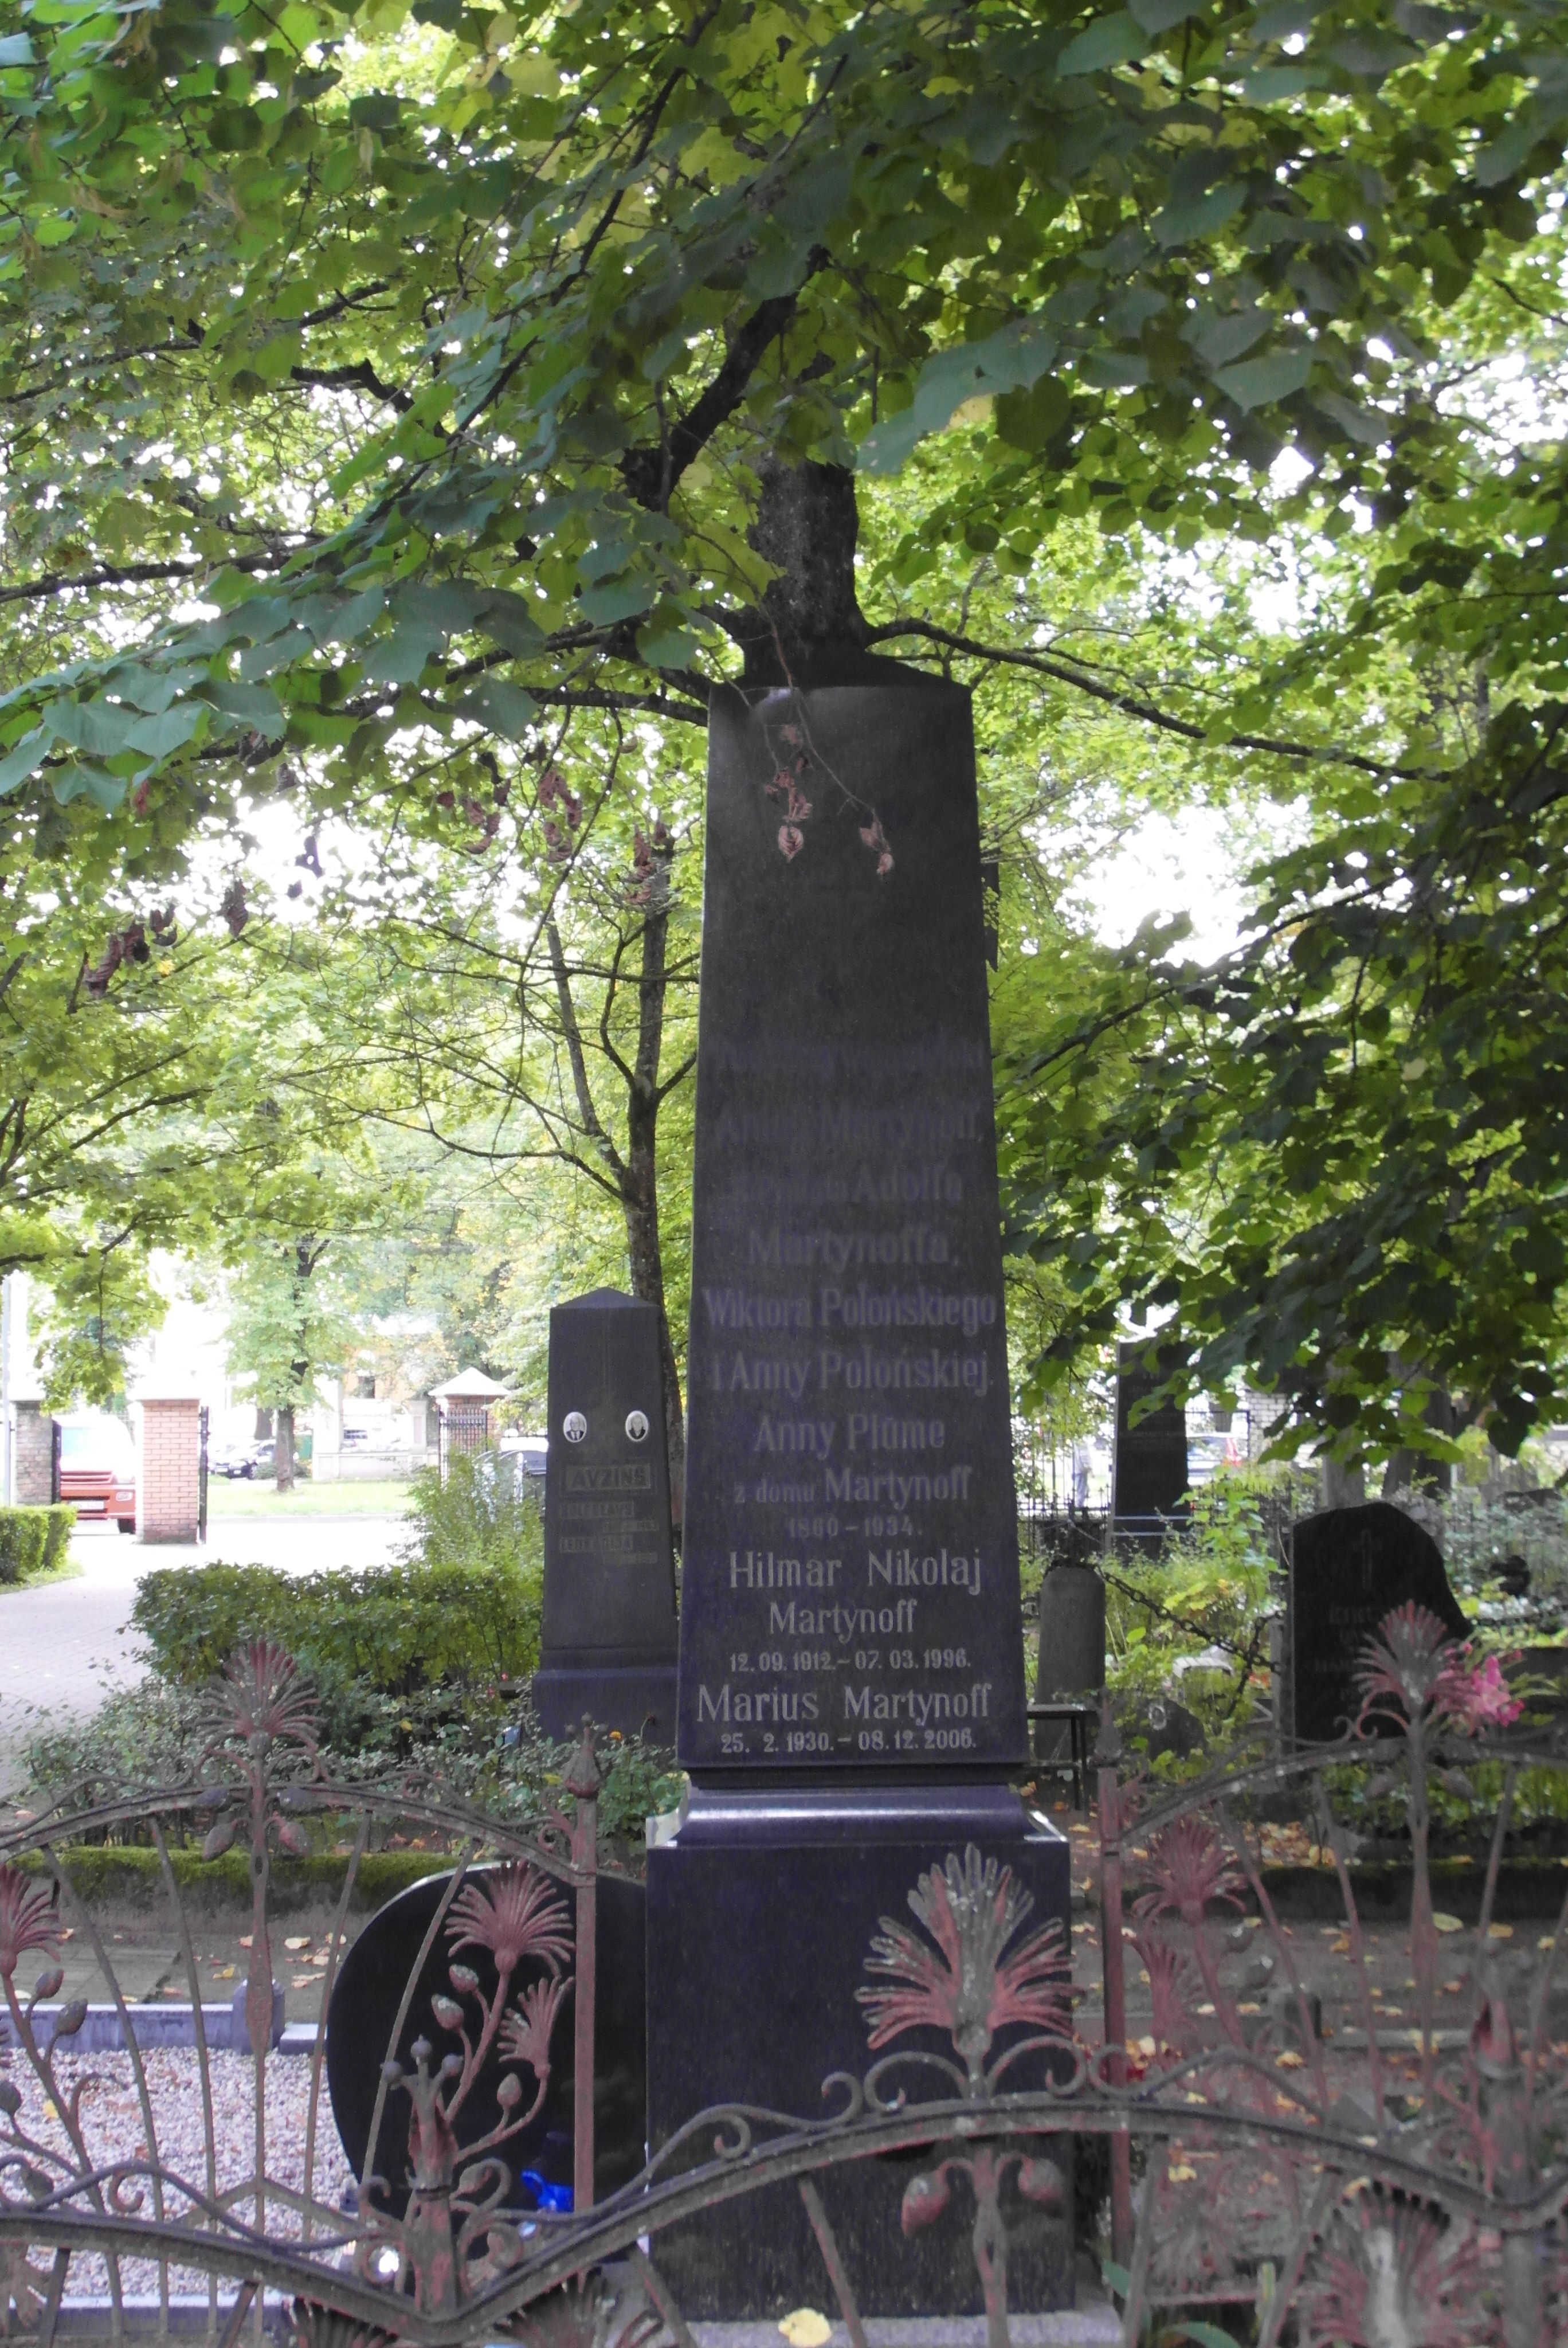 Martynoff family tombstone, St Michael's cemetery in Riga, as of 2021.